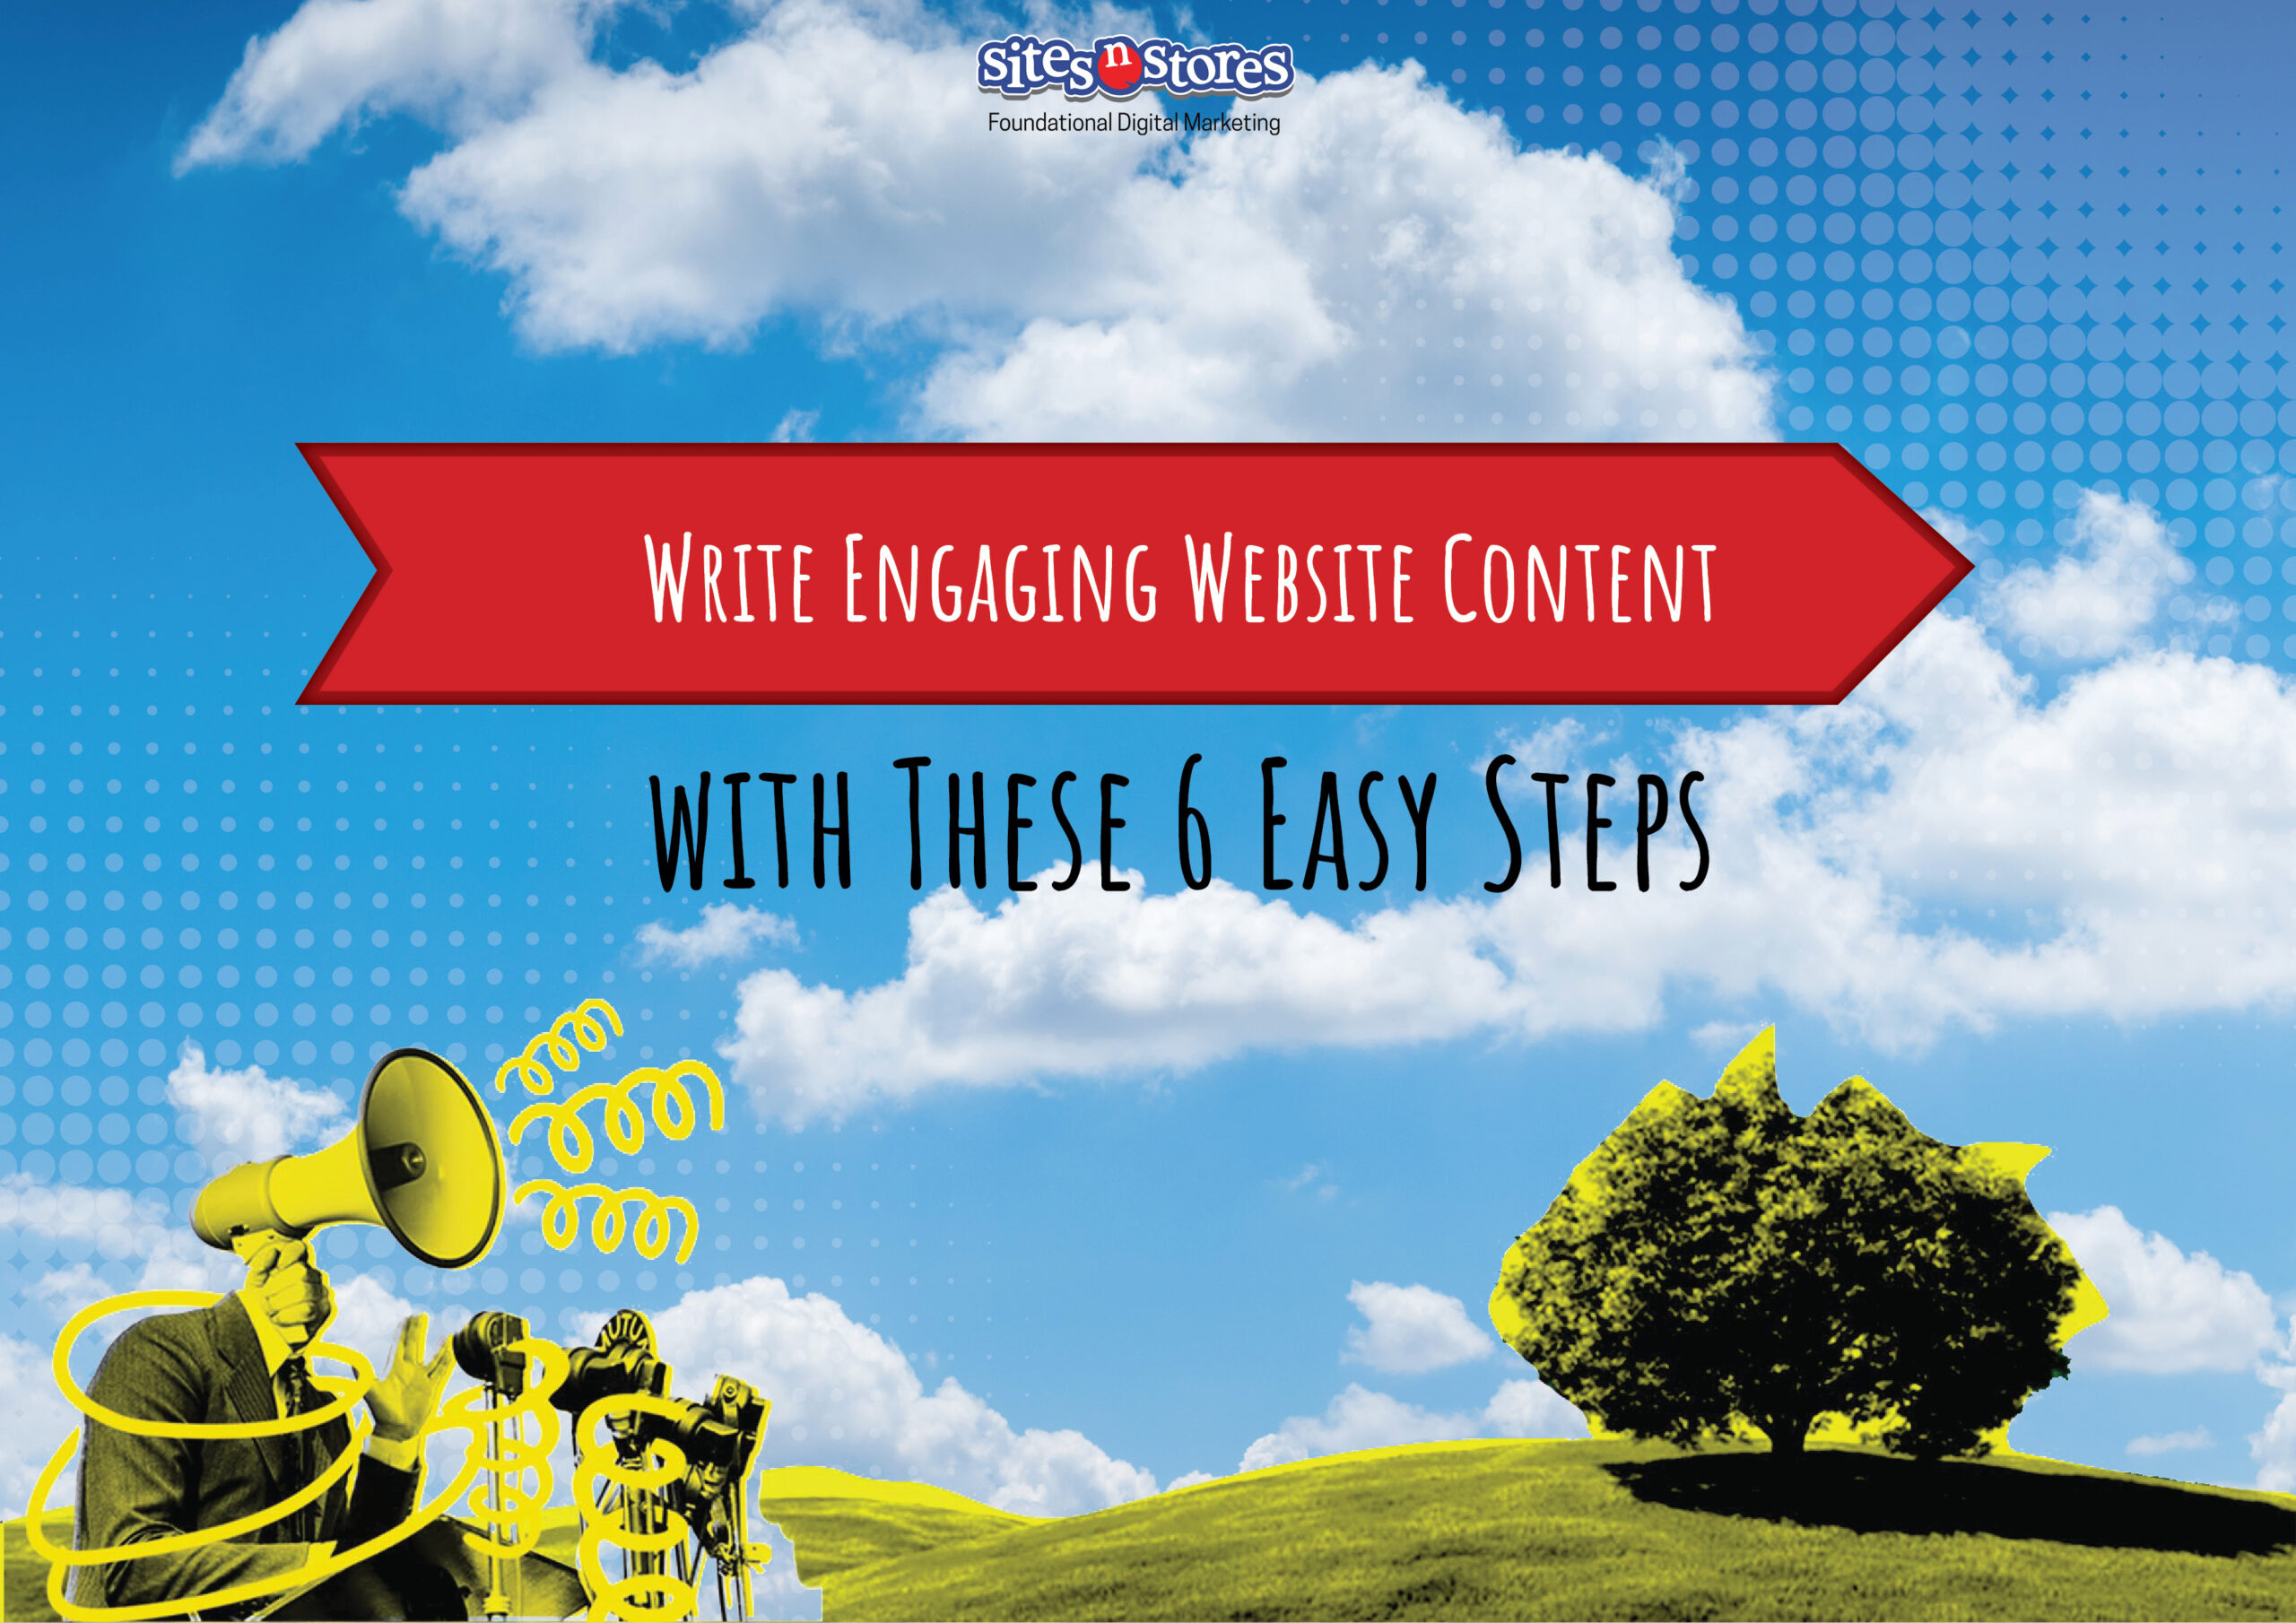 Write Engaging Website Content with These 6 Easy Steps